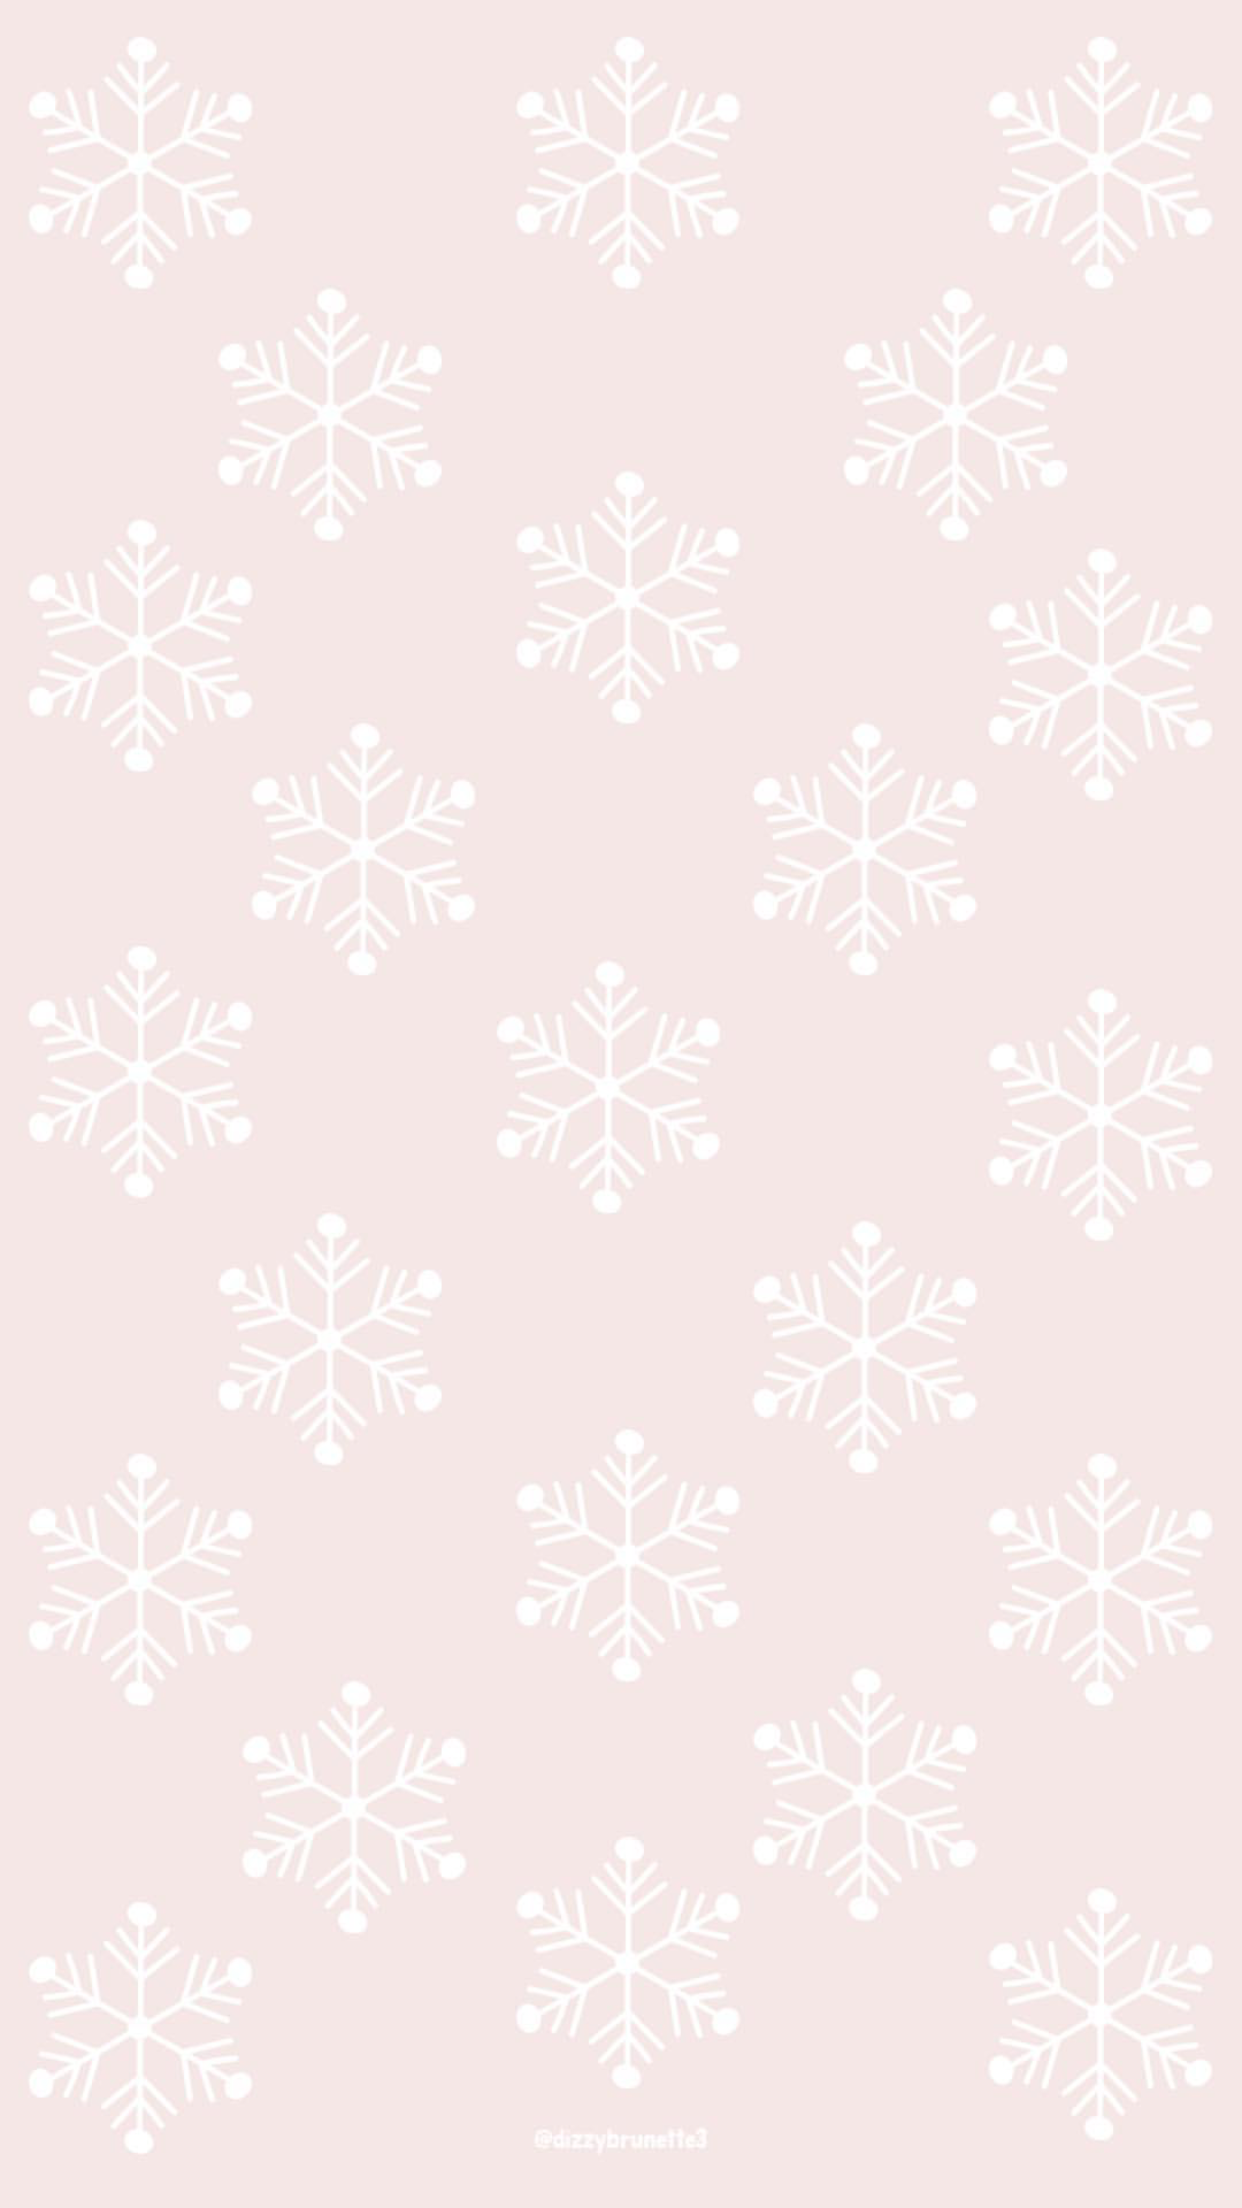 Check out this awesome Winter Phone background!